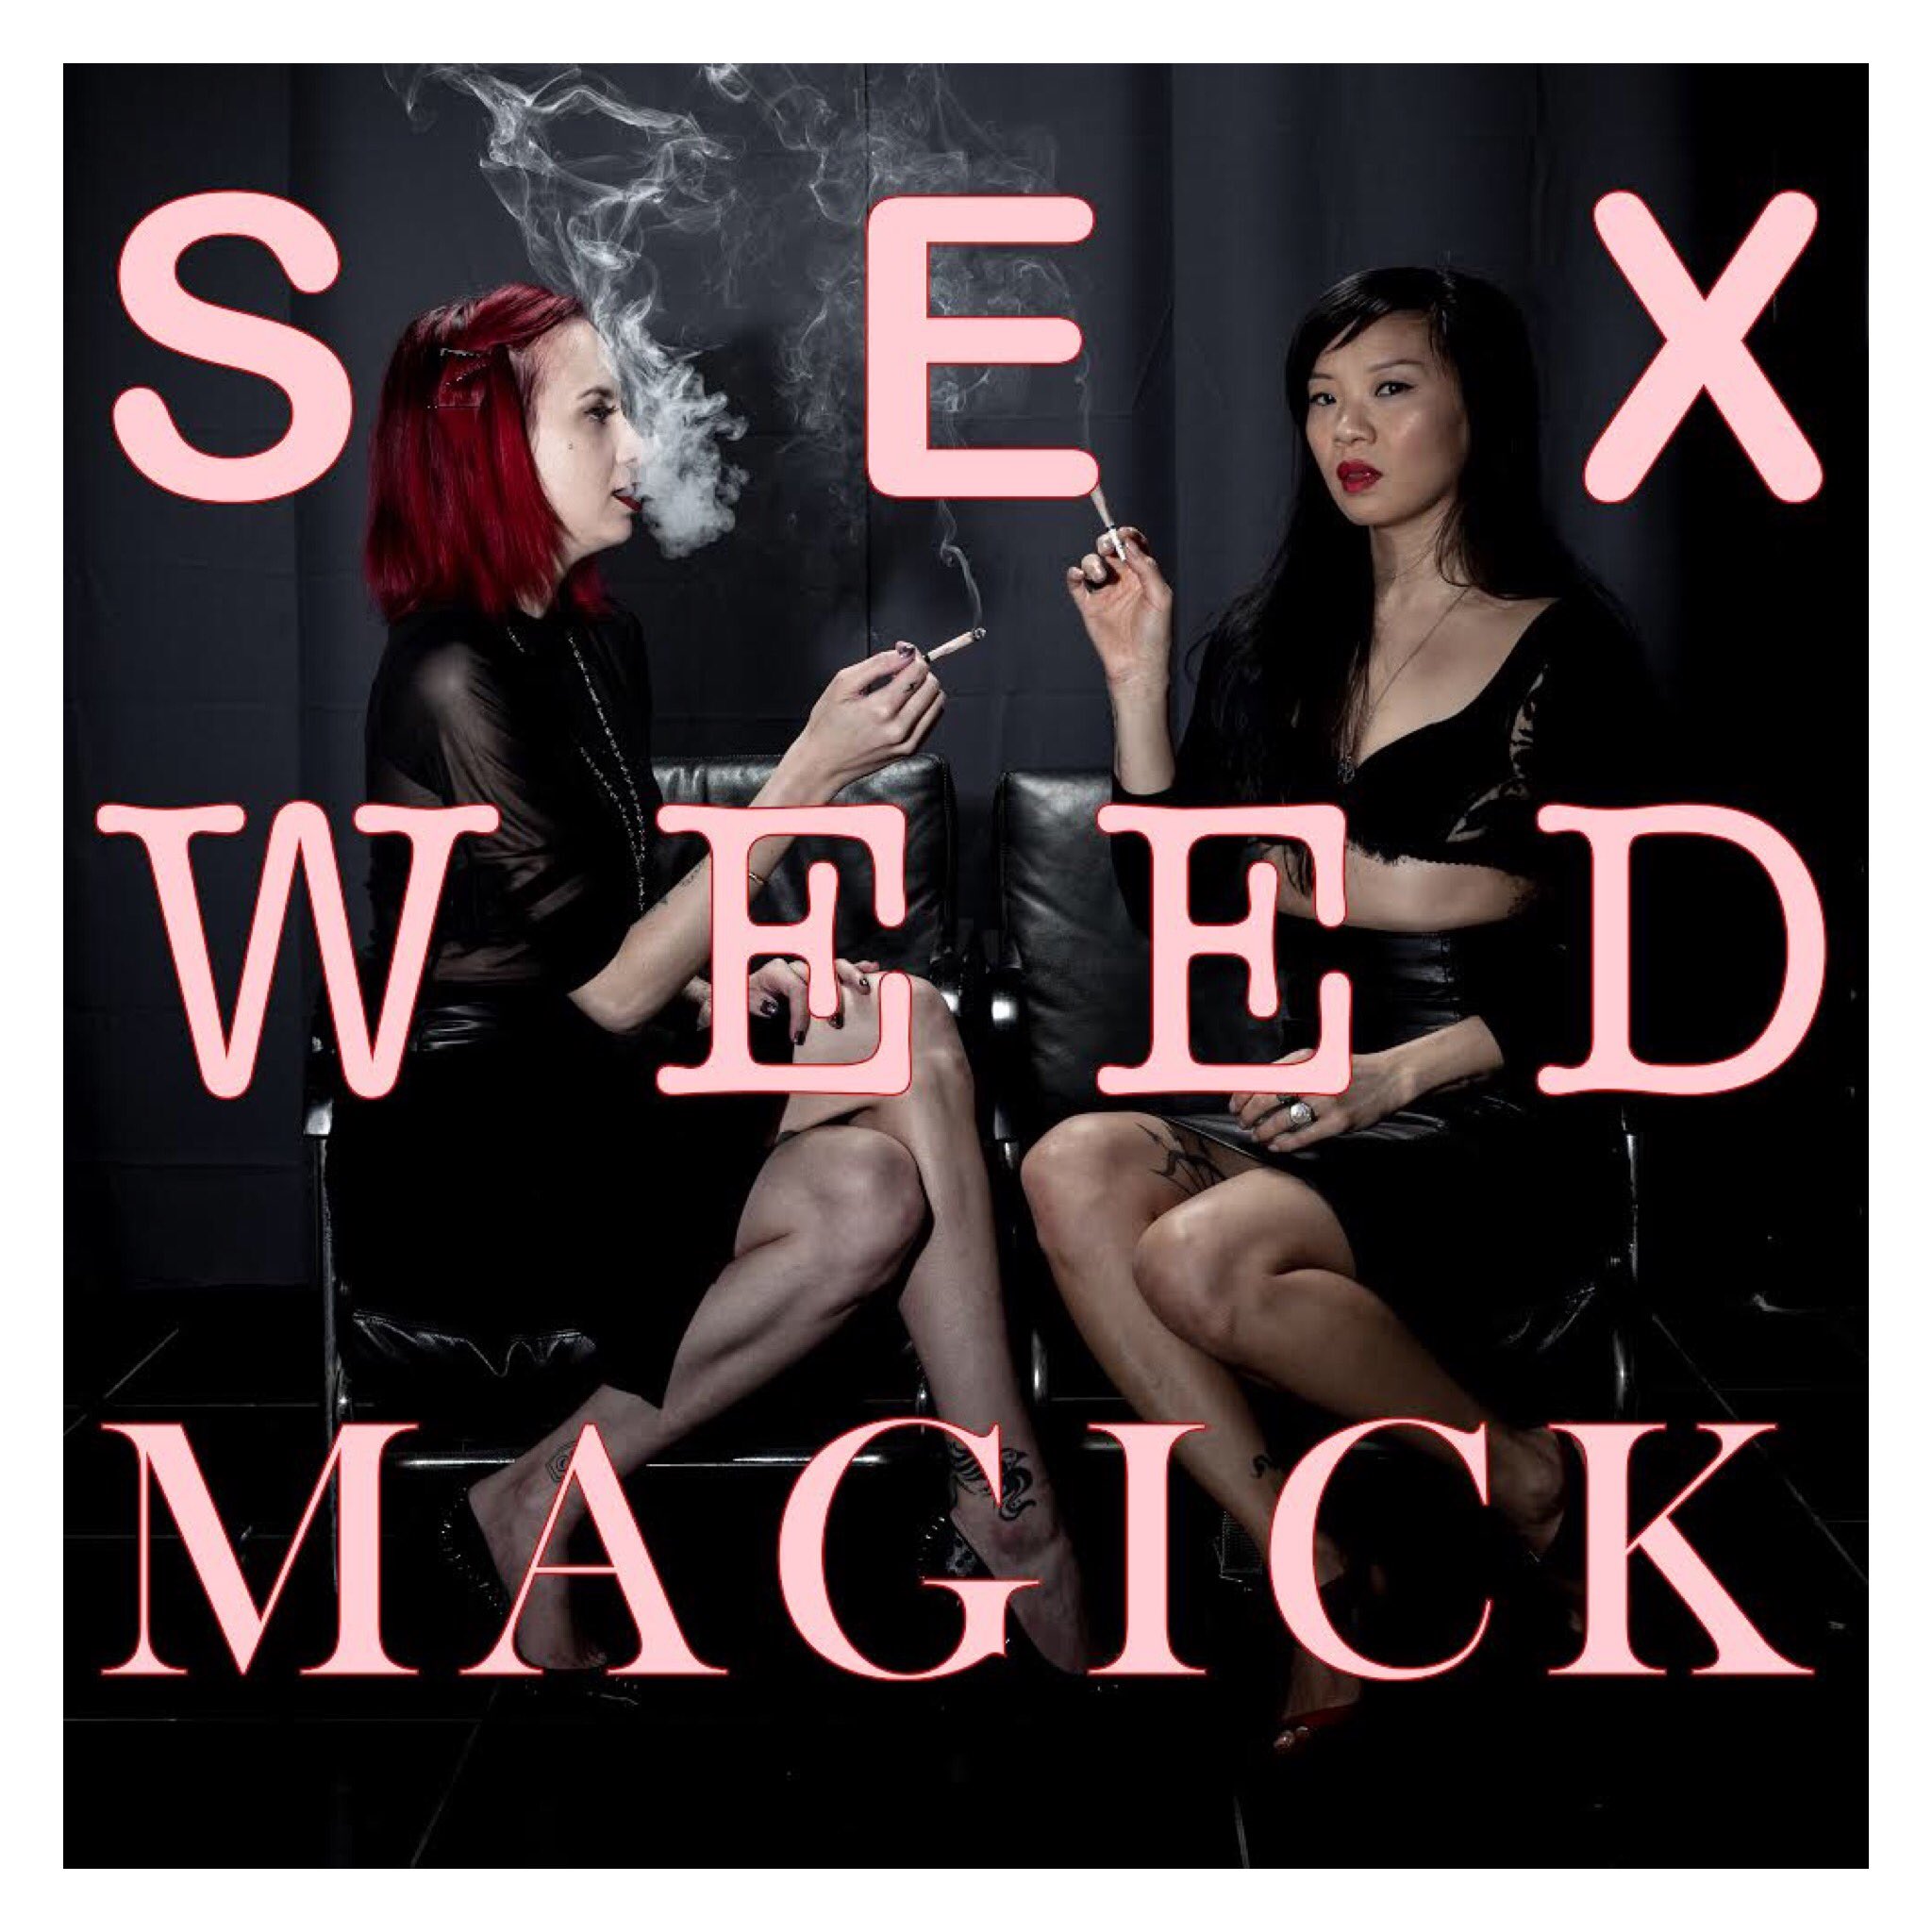 the cover image for Sex Weed Magick. two women sit smoking on black armchairs